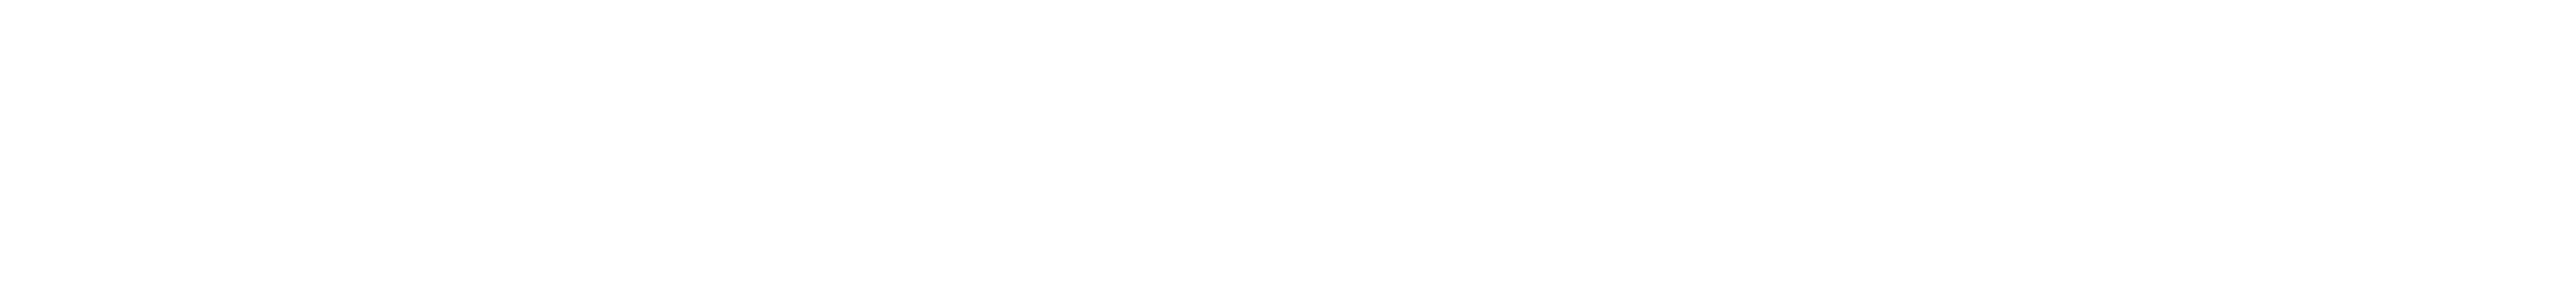 The United States Conference of Mayors, National League of Cities, Results for America, Delivery Associates